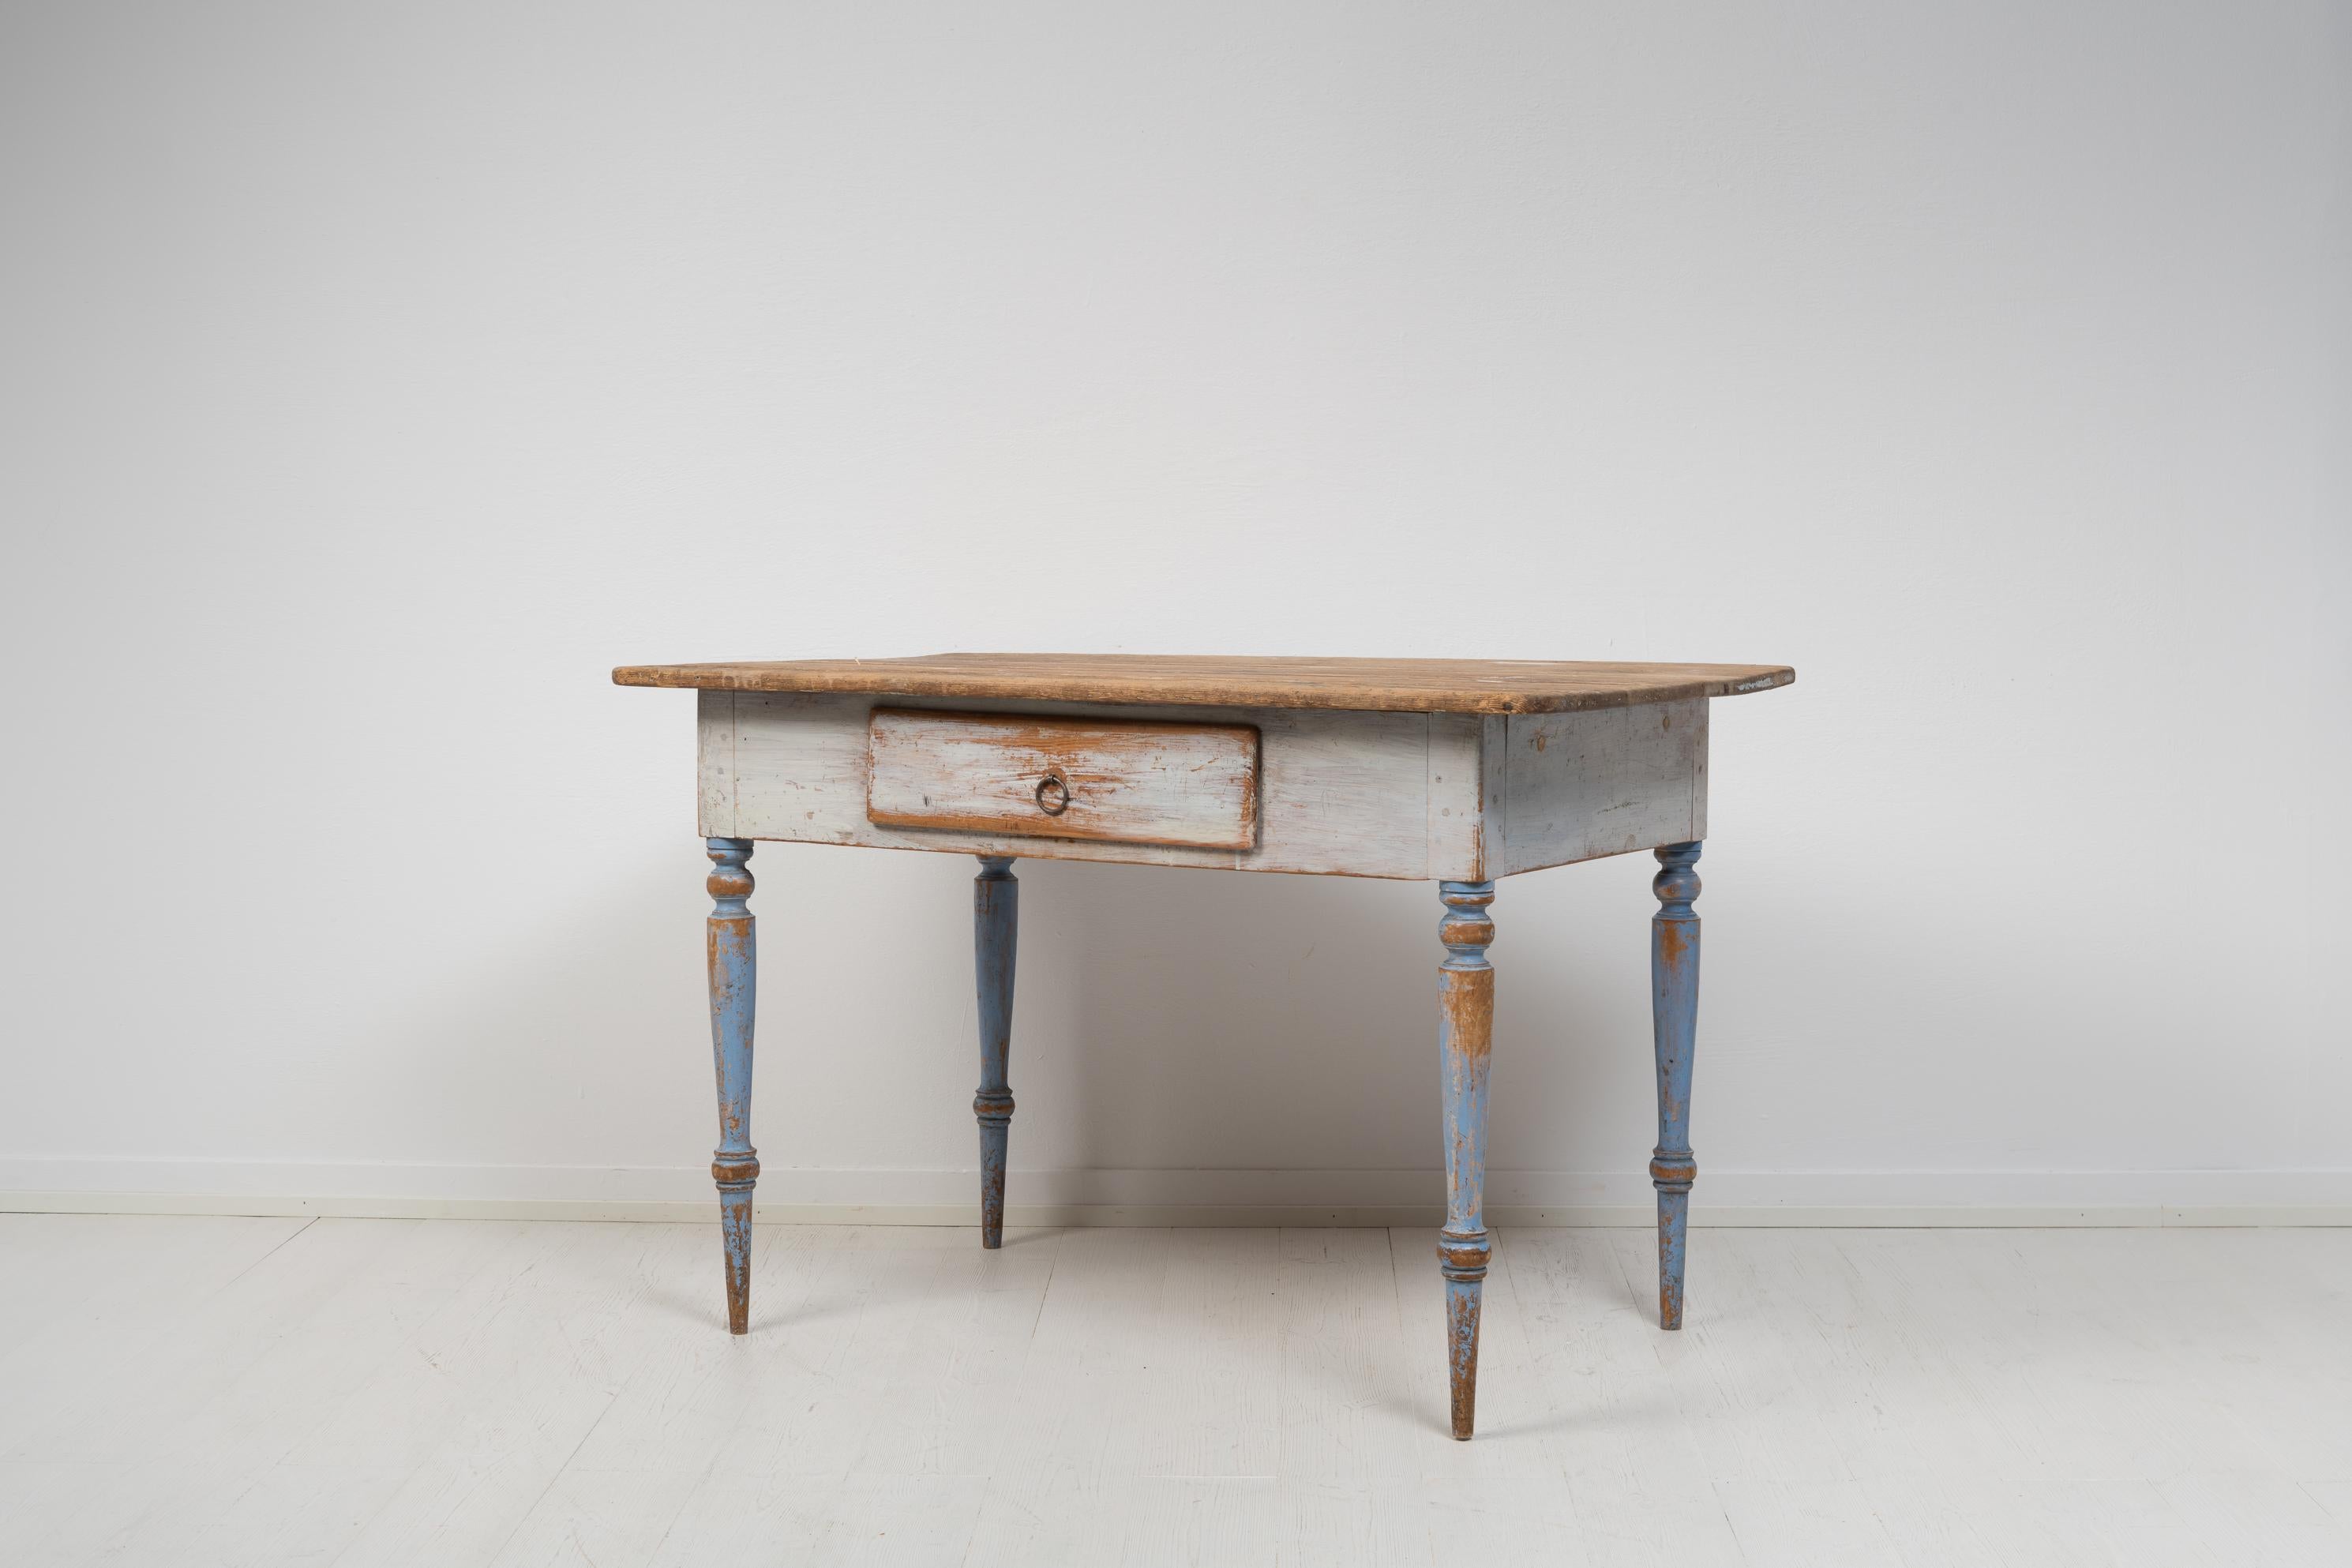 Small 19th Century Swedish Folk Art Table In Good Condition For Sale In Kramfors, SE